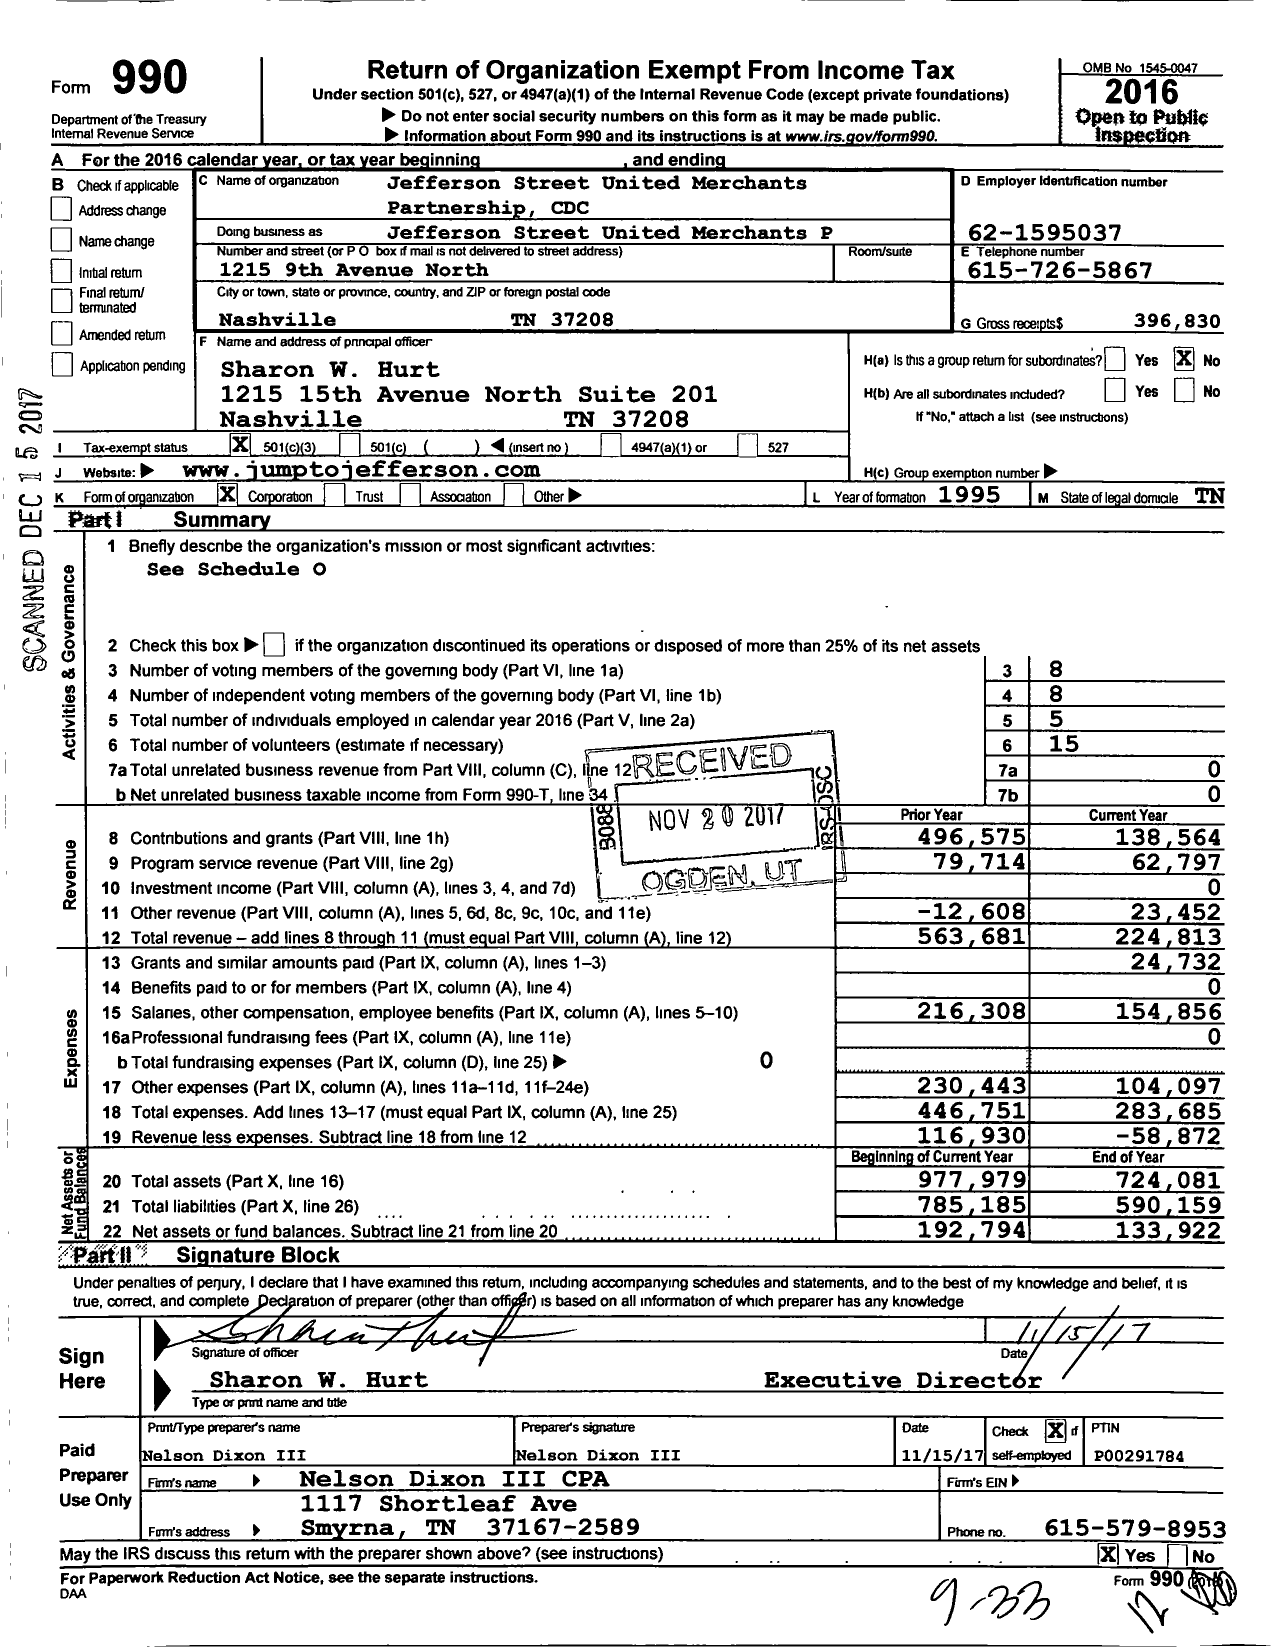 Image of first page of 2016 Form 990 for Jefferson Street United Merchants Partnership